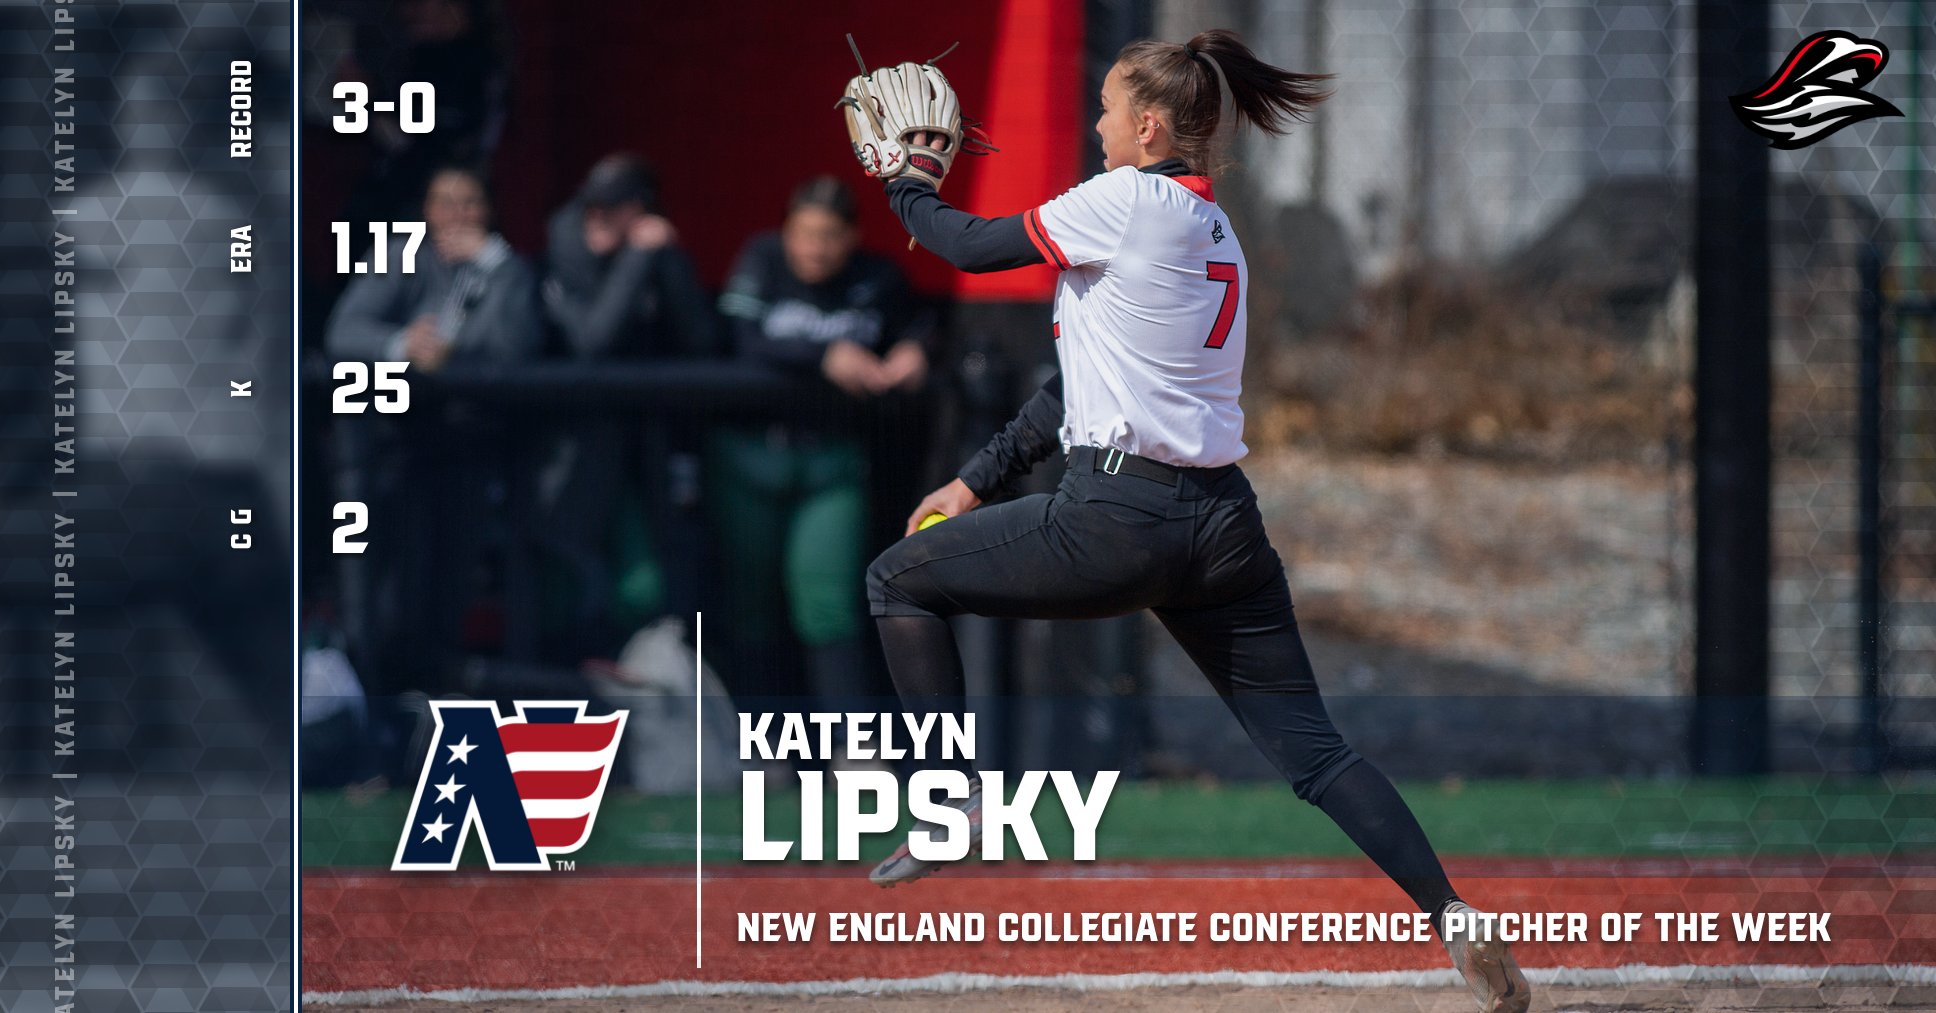 Lipsky Repeats as NECC Pitcher of the Week